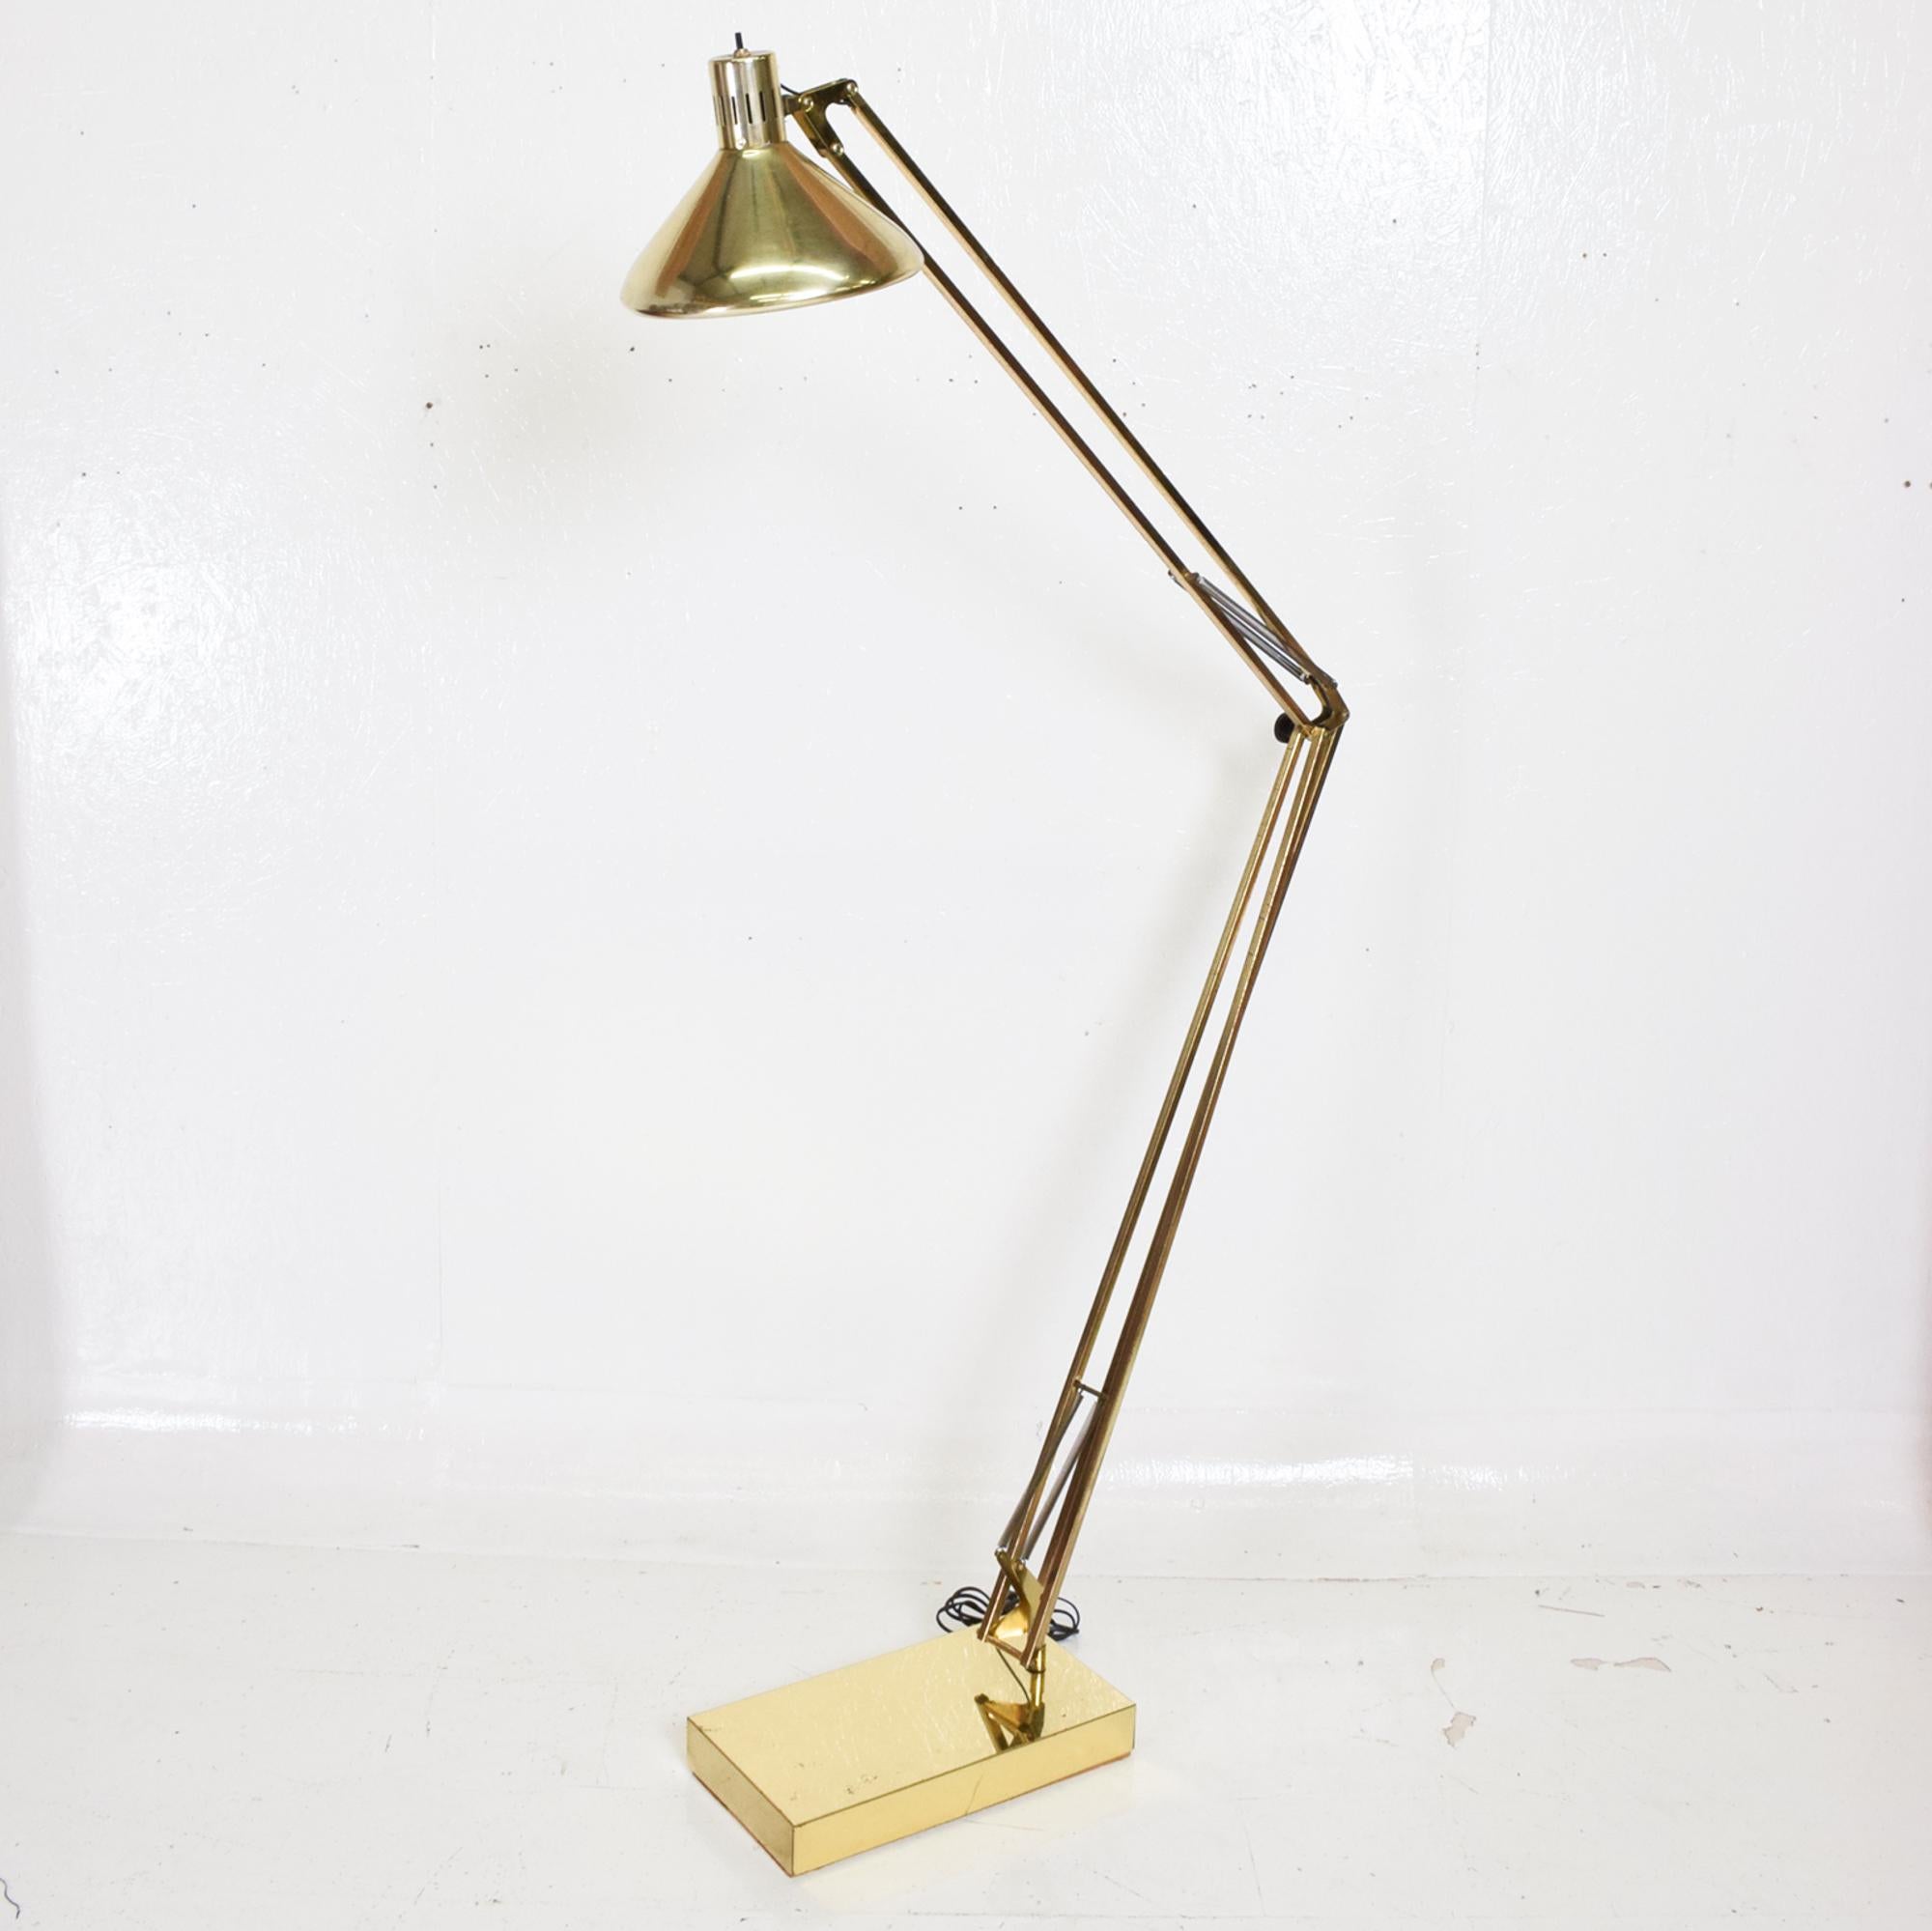 Huge vintage floor light drafting architect's articulating lamp by Luxo in brass.
Brass articulating arm with with heavy base.
An oversized Mid-Century Modern brass floor Lamp Drafting Architect’s Lamp Large enough that it works over a couch